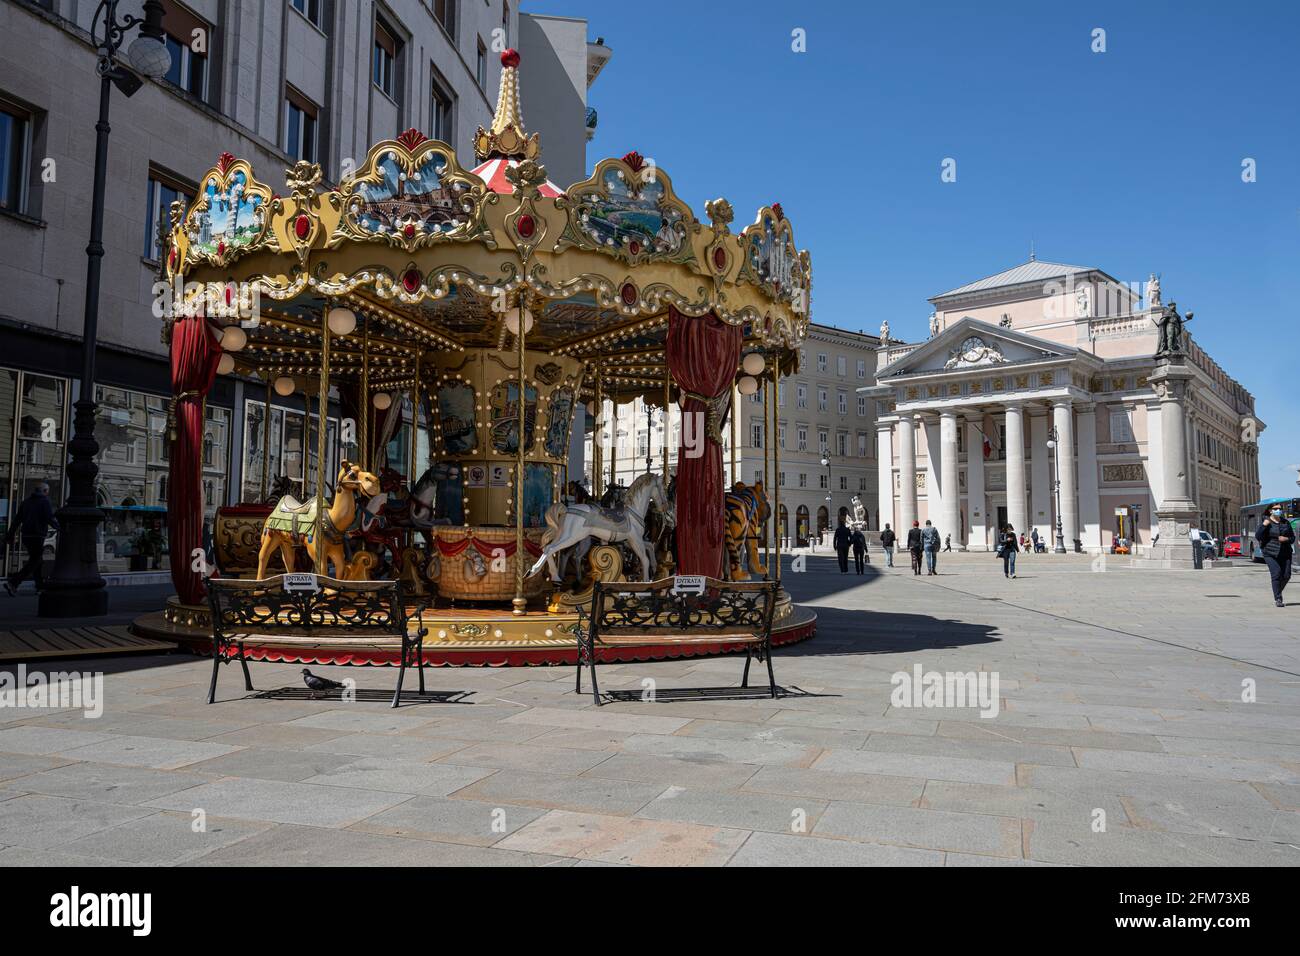 Trieste, Italy. May 3, 2021.  An old carousel for children in piazza della Borsa Stock Photo